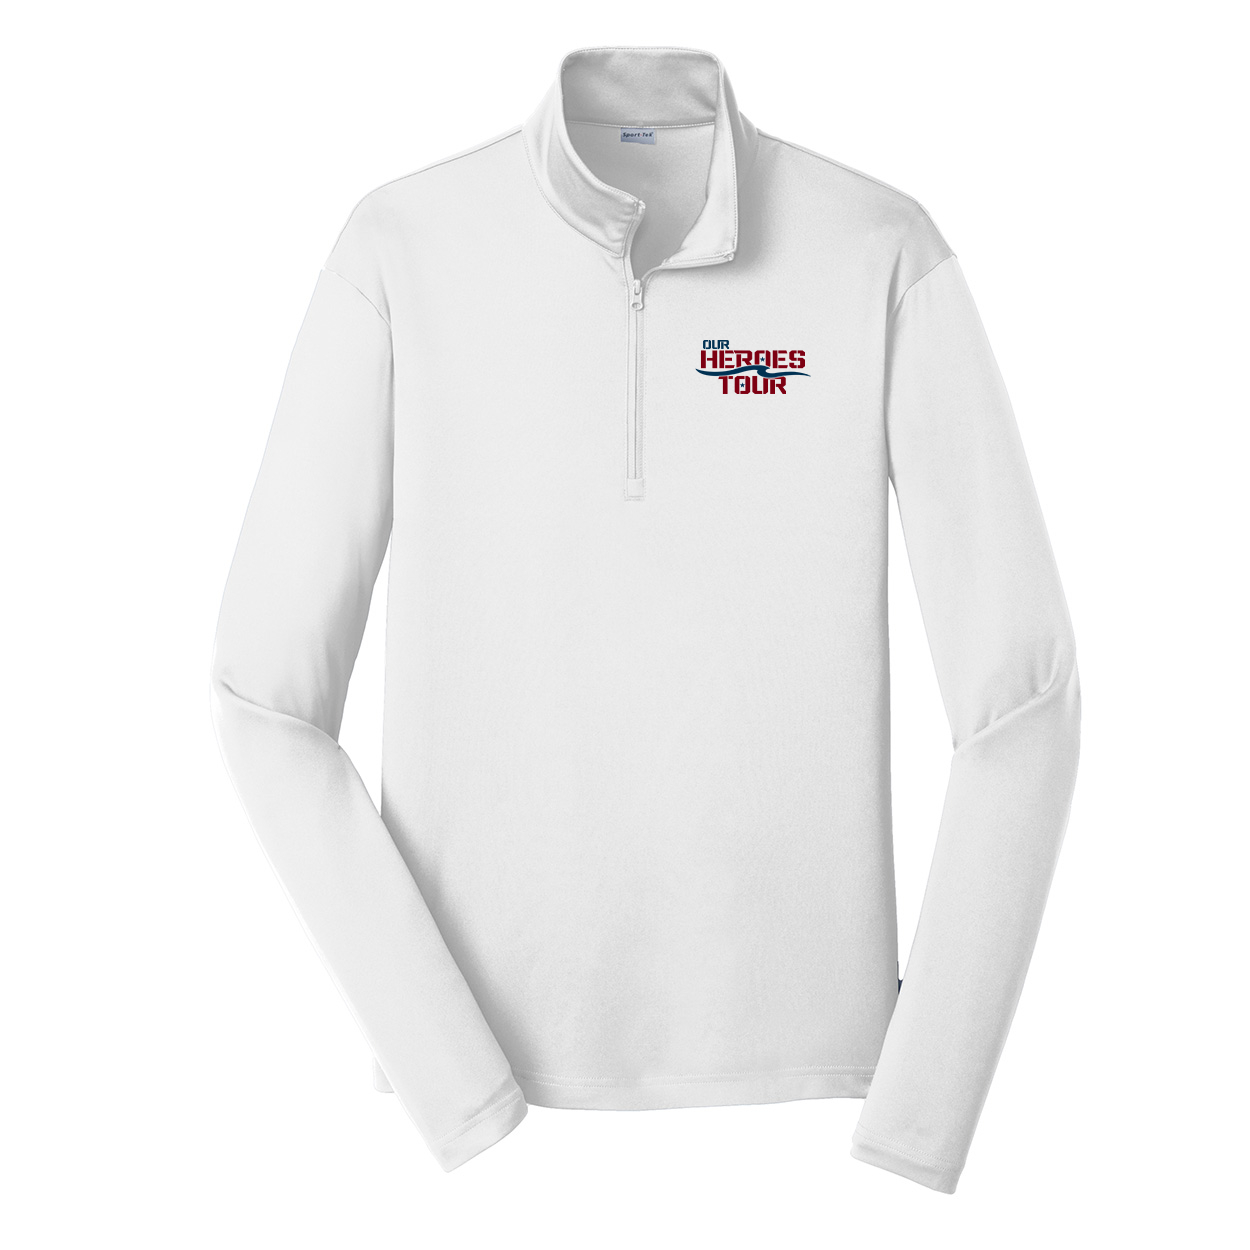 Our Heroes Tour Night Out Premium Quarter-Zip Pullover Long Sleeve Shirt White (White Logo)